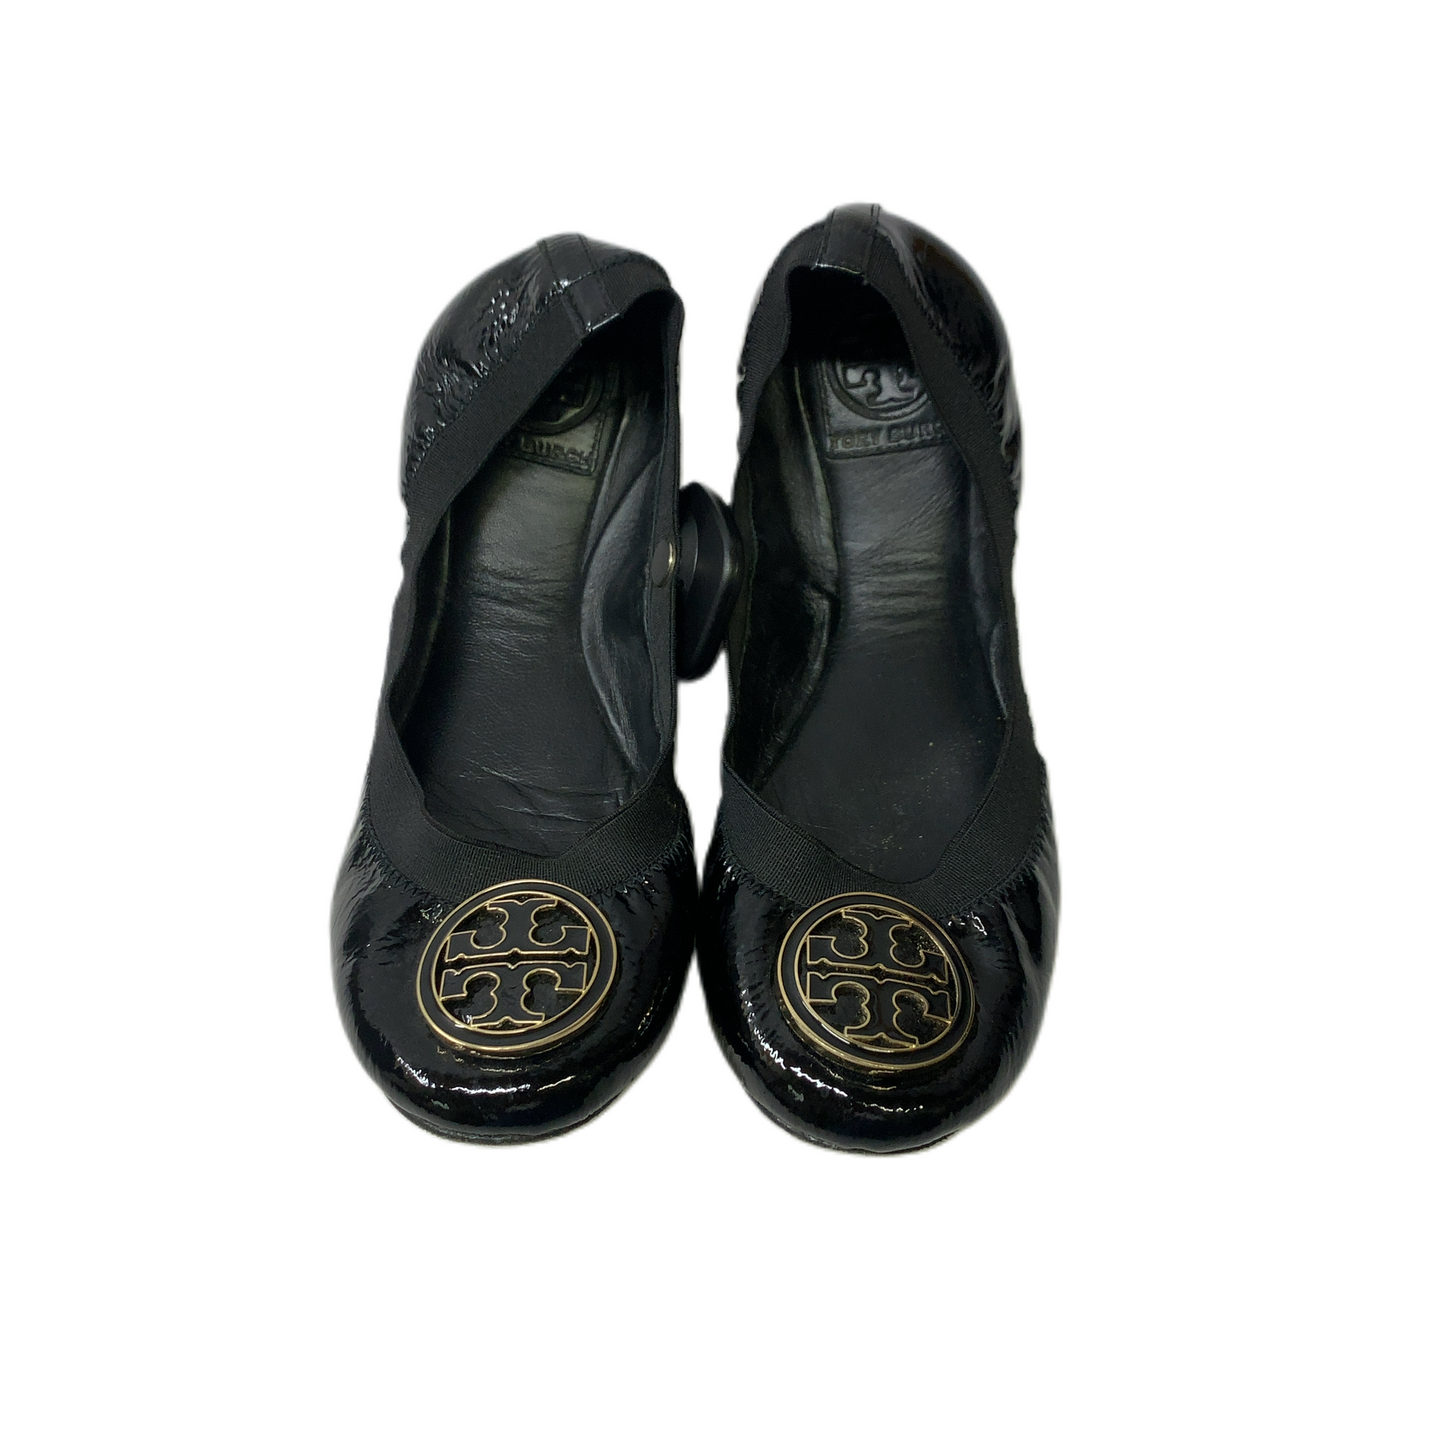 Black  Shoes Designer By Tory Burch  Size: 7